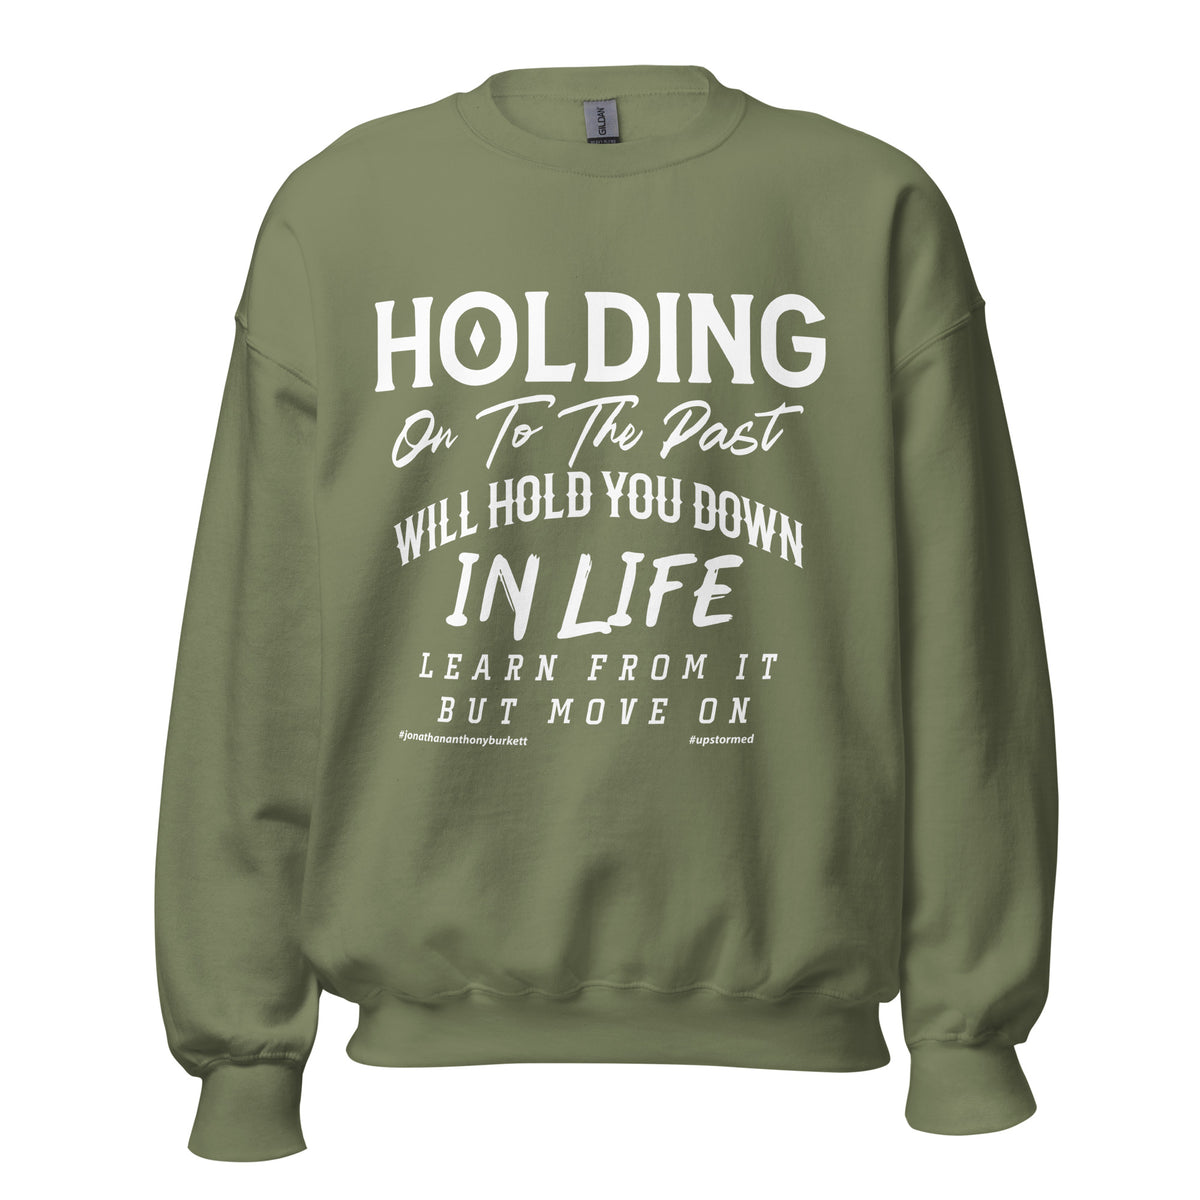 Holding On To The Past Upstormed Sweatshirt